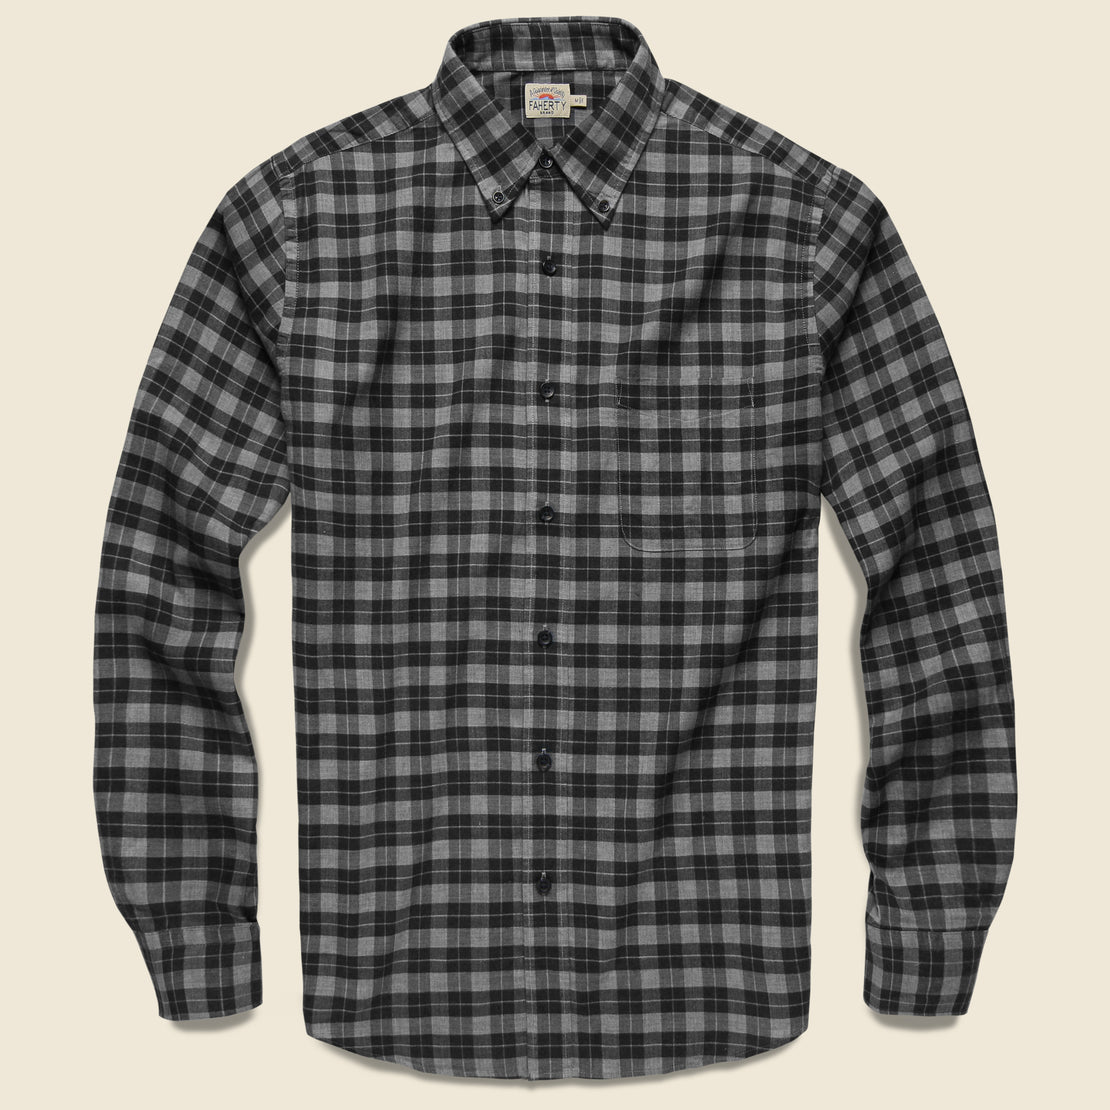 Faherty Everyday Shirt - Grey Charcoal Gingham